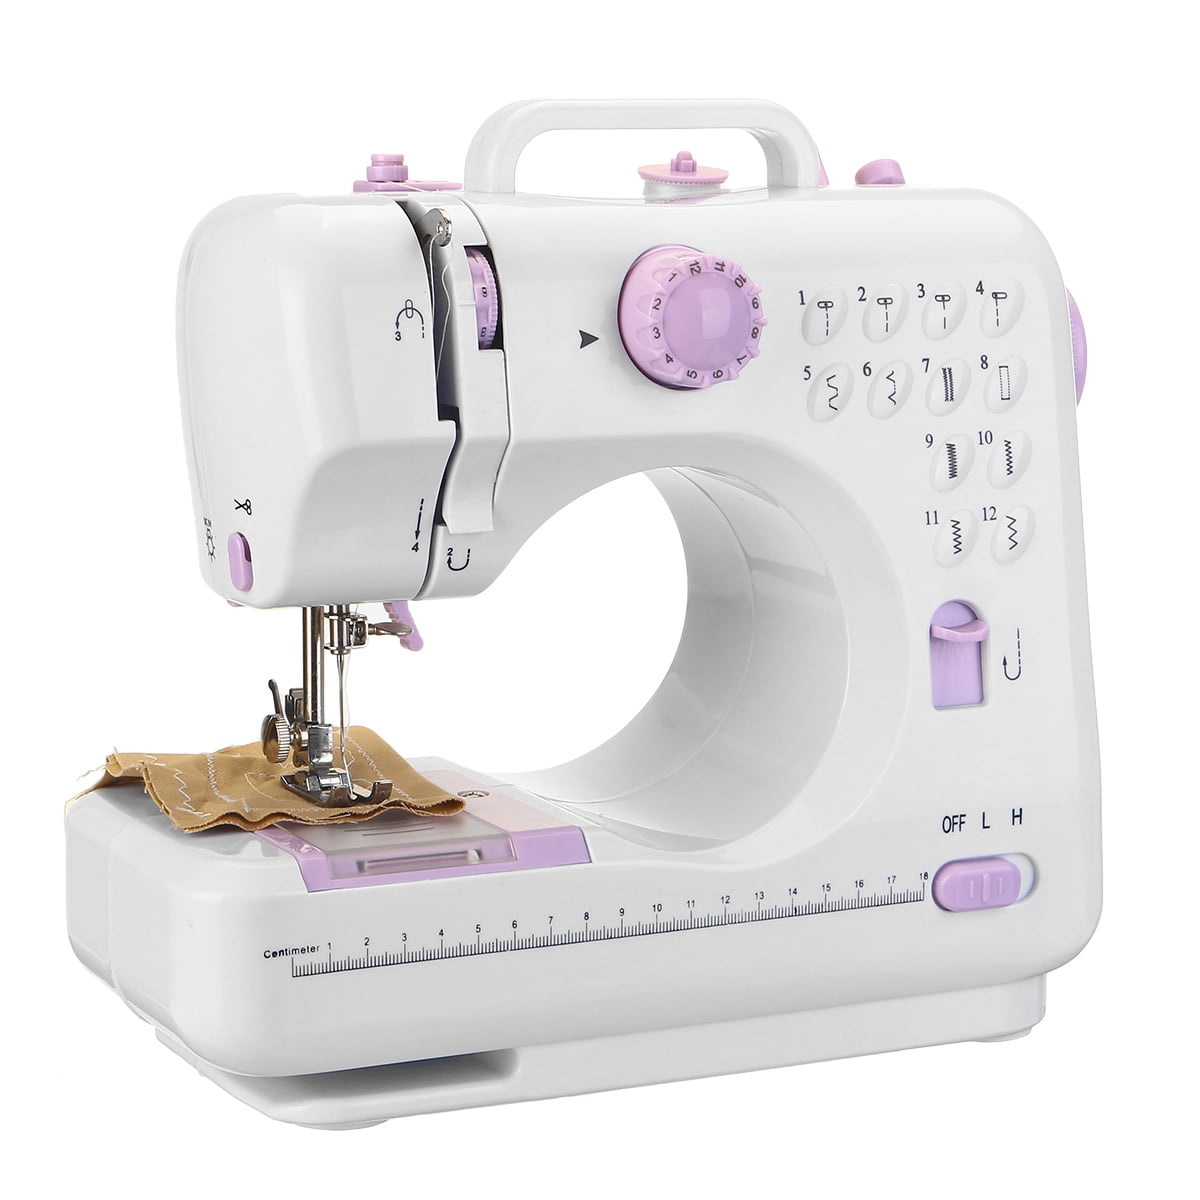 Multifunctional Mini Electric Sewing Machine Household Crafting Mending Too # 